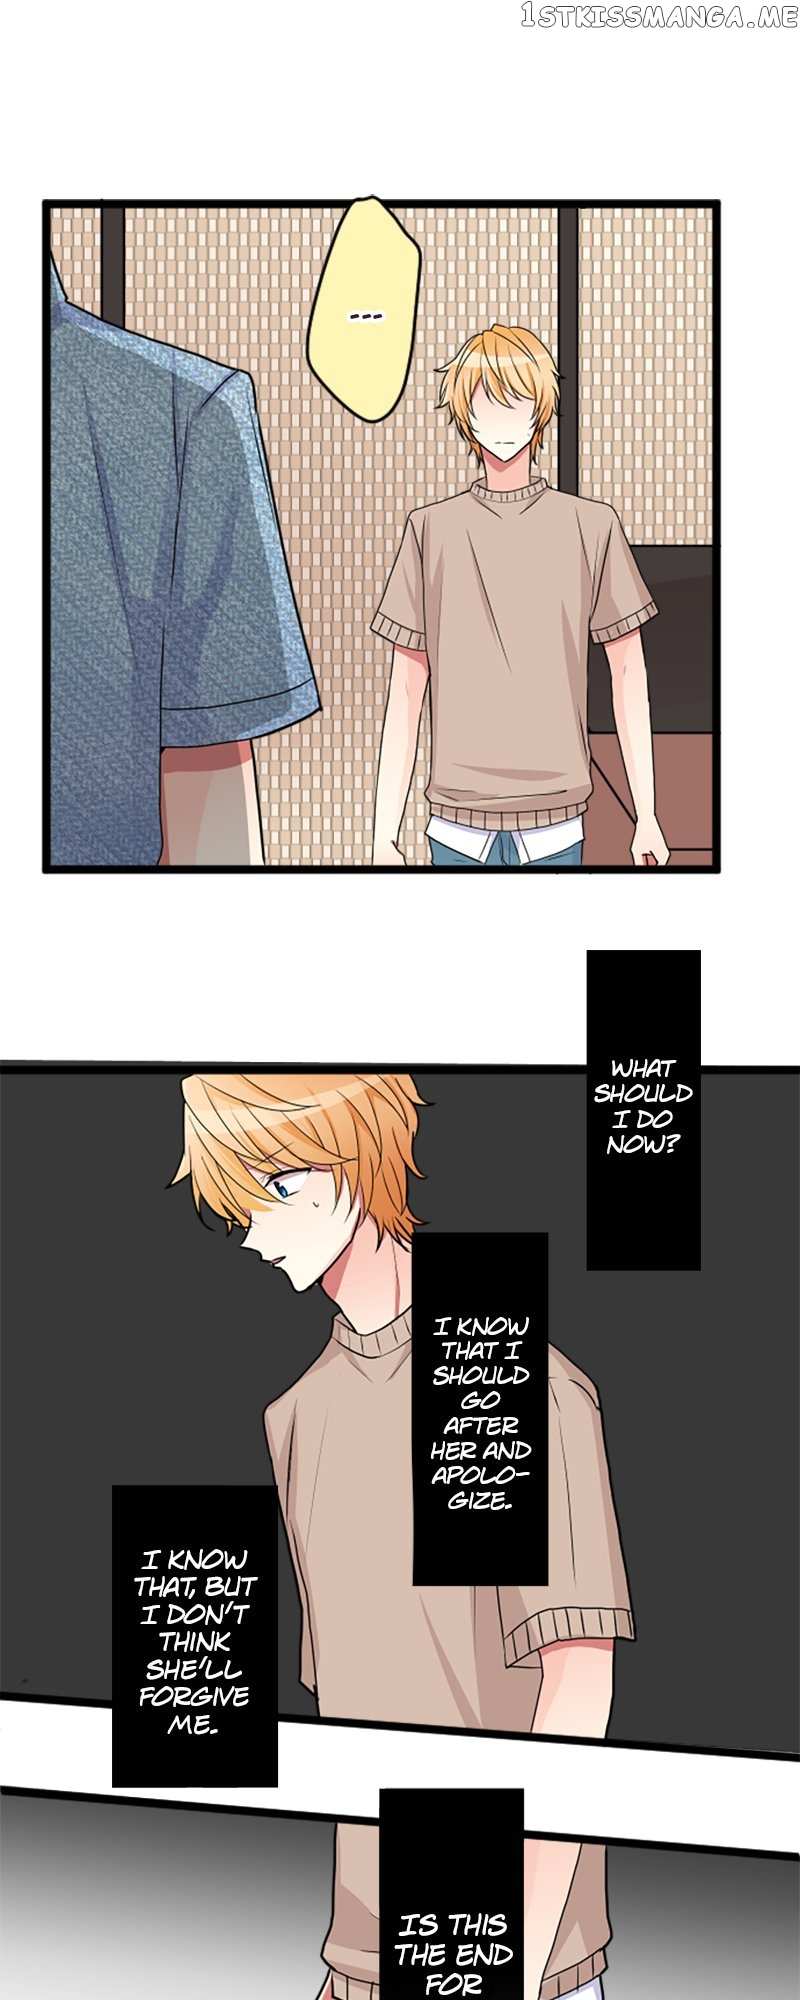 Next to You ~The Story of a Couple with a Huge Age Difference~ Chapter 126 - p2.42 - page 6